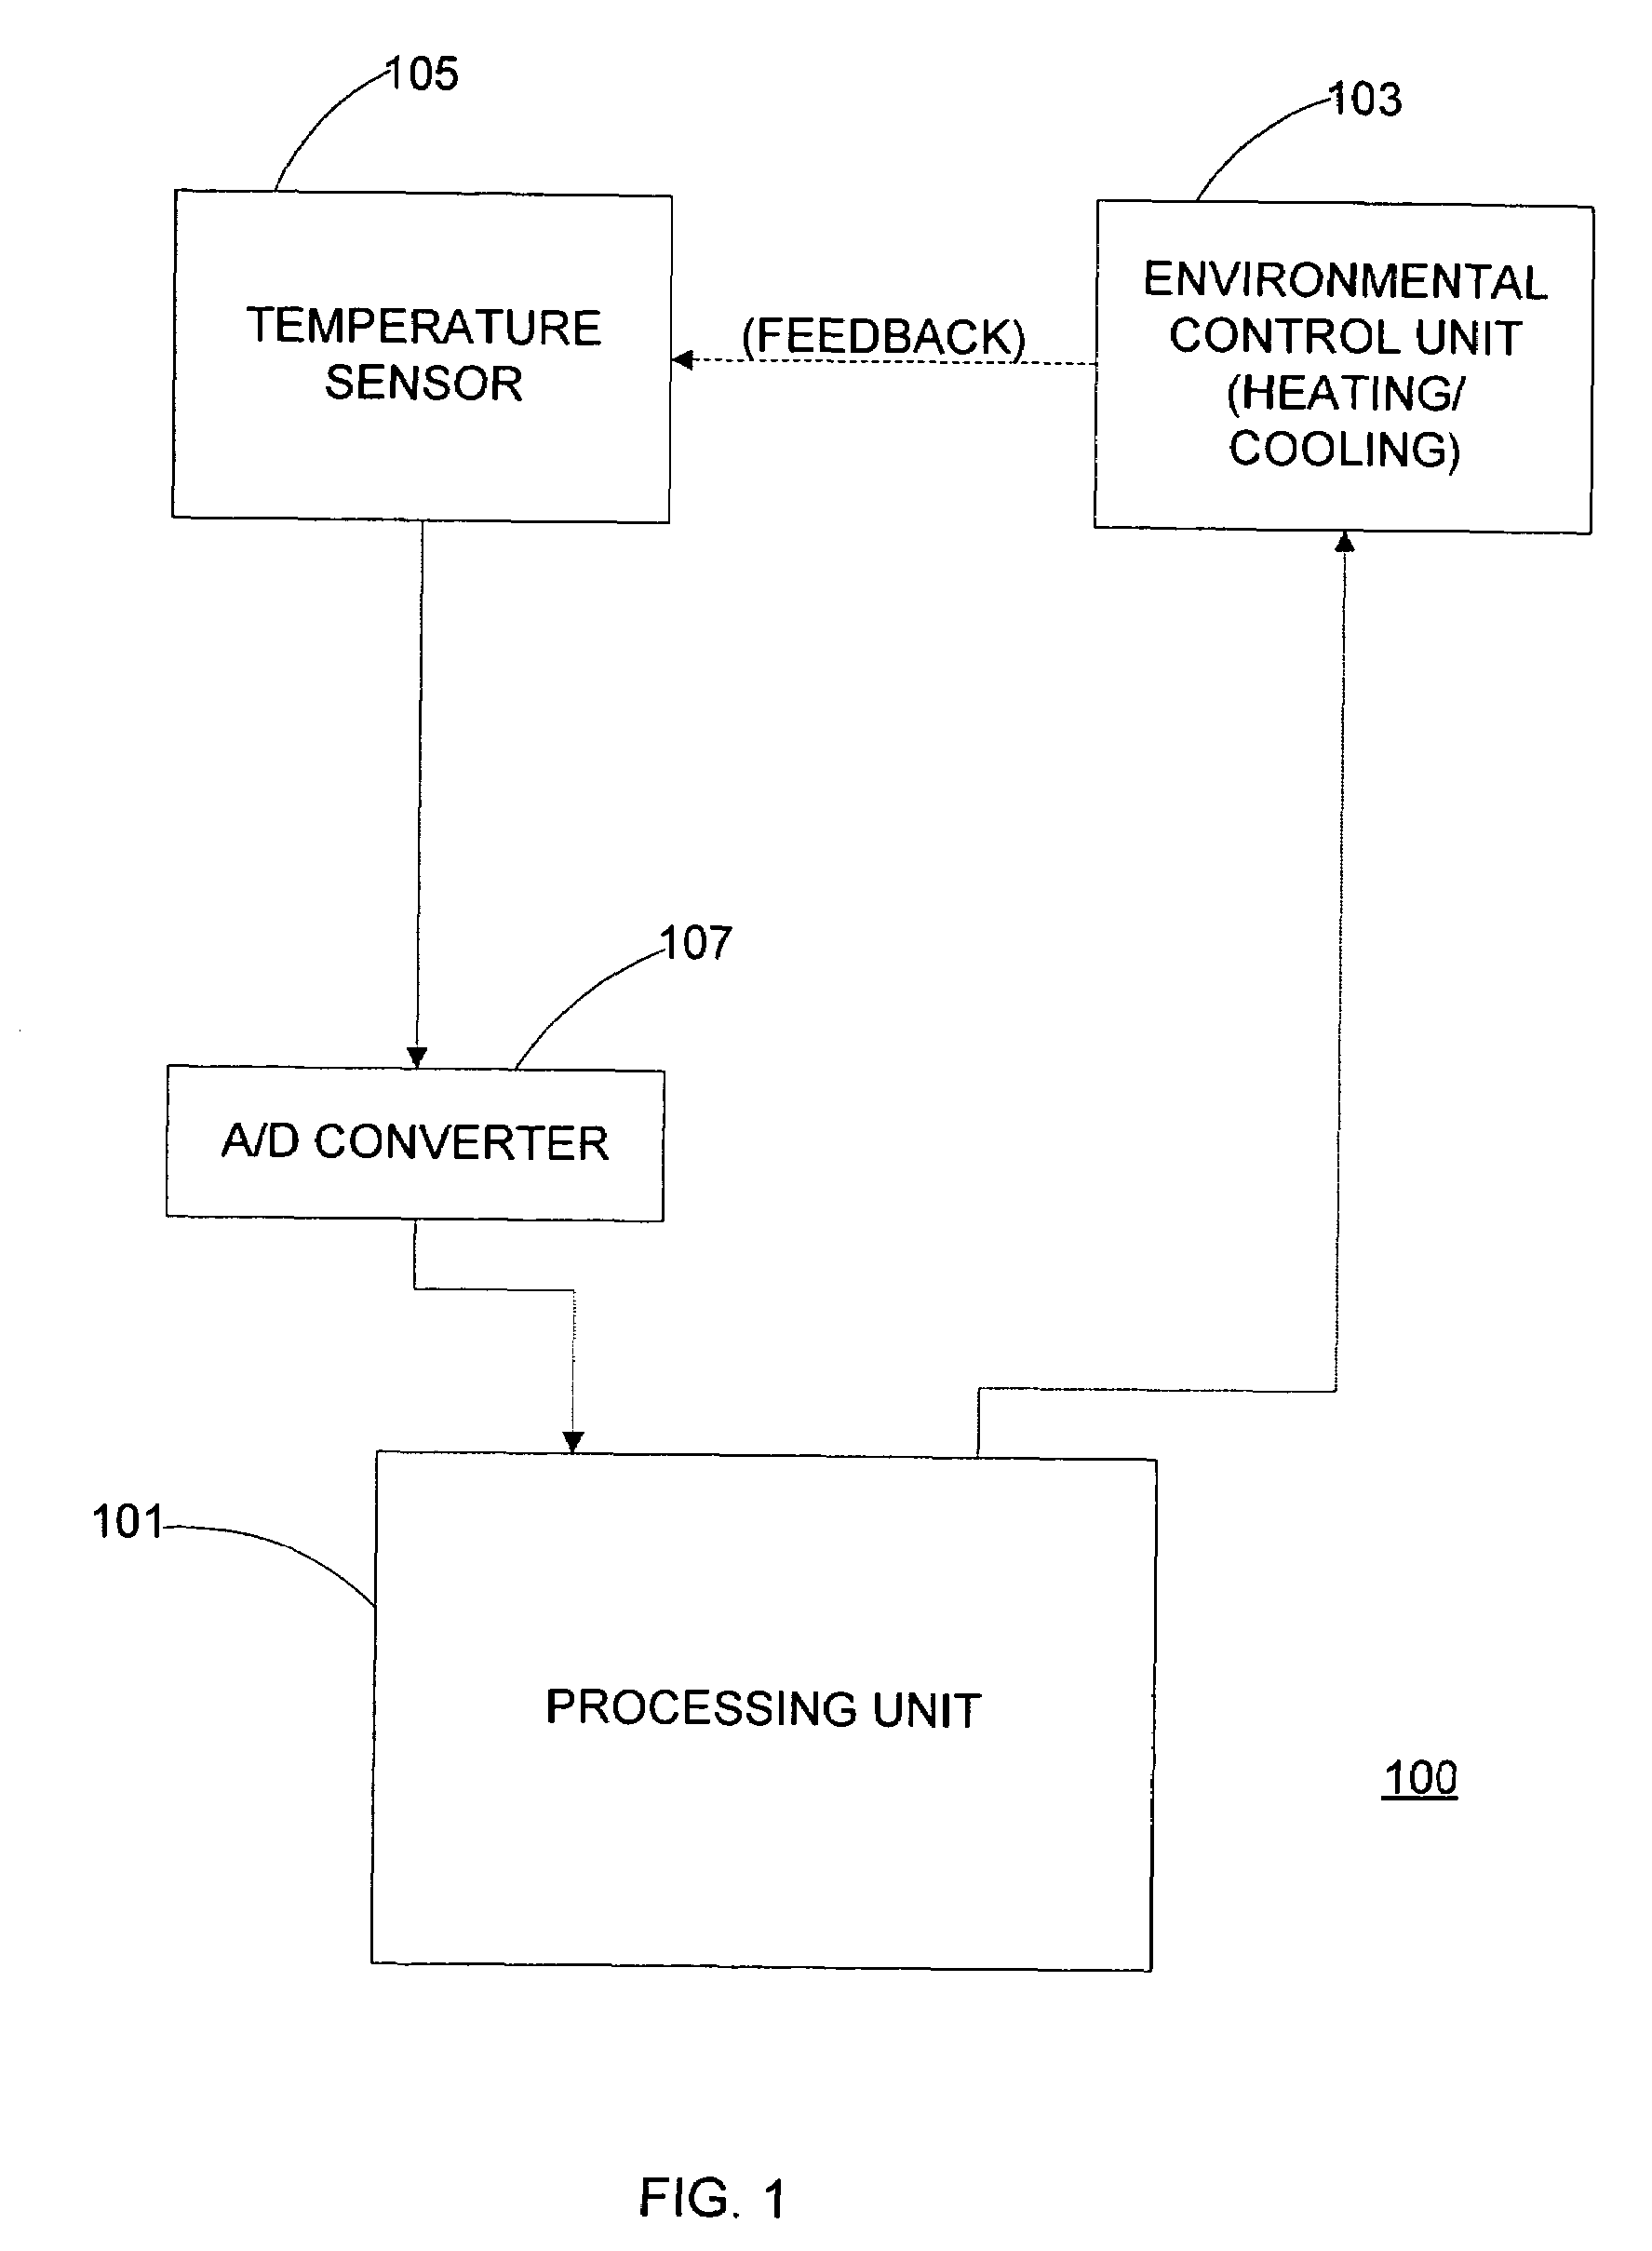 Apparatus for temperature control using a cycle rate control algorithm